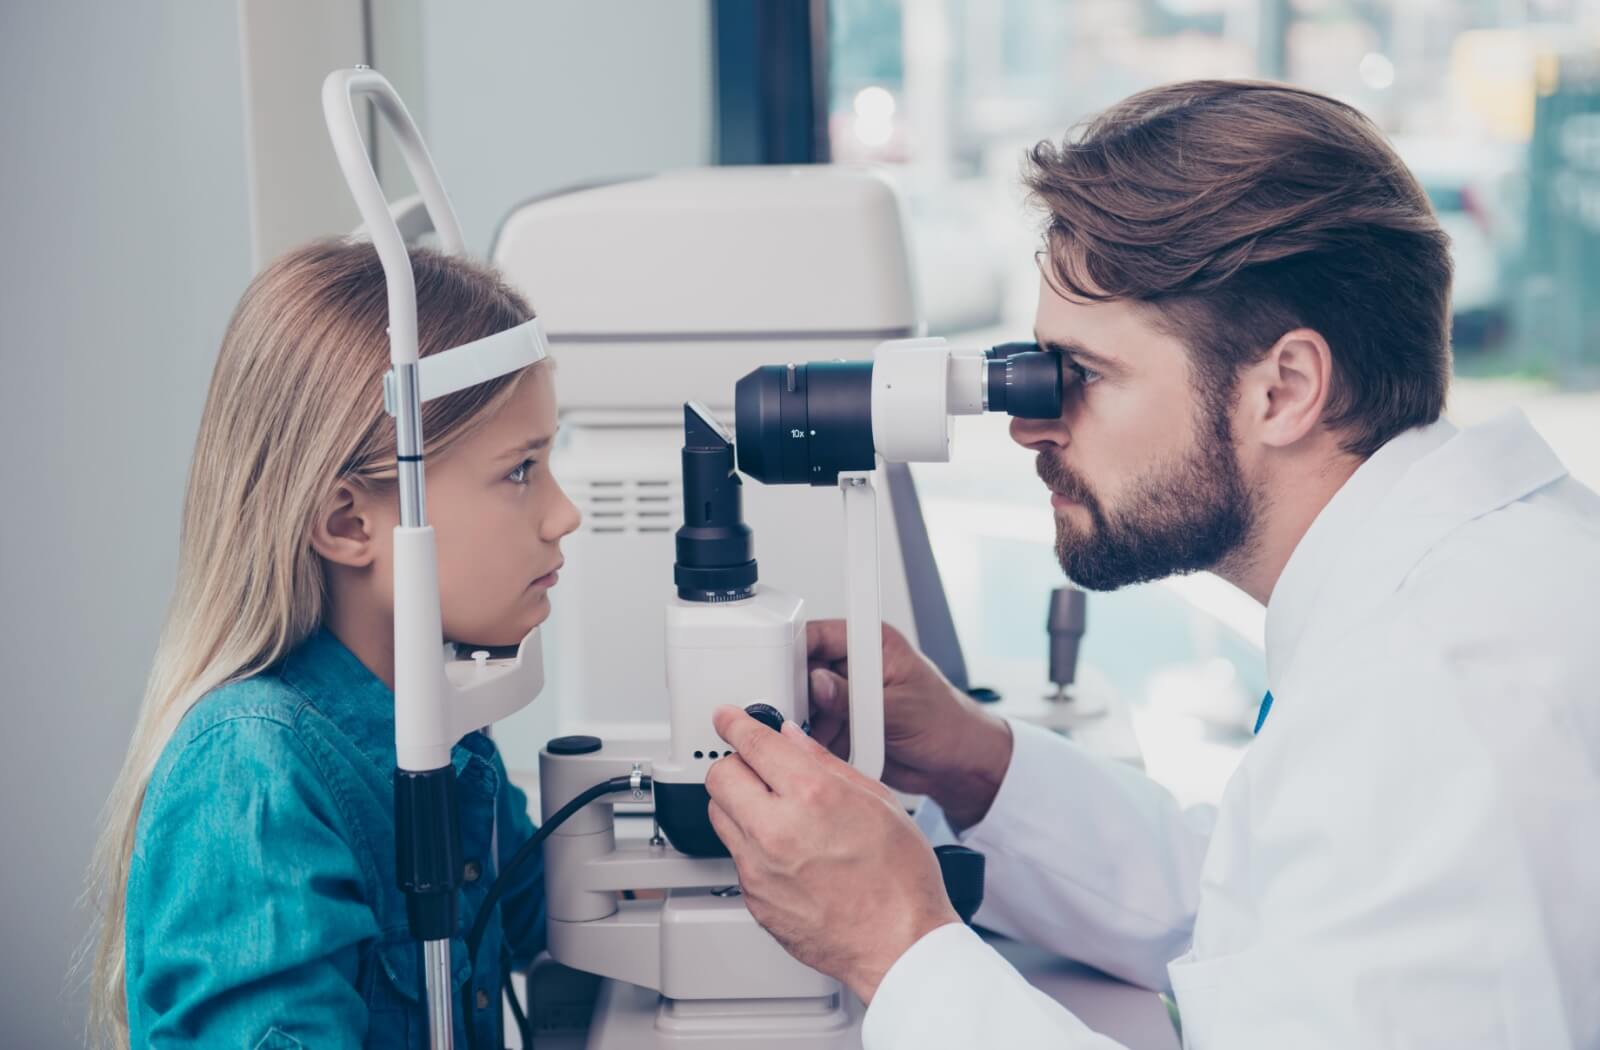 A male optometrist uses a medical device to examine the eyes of a young child and look for potential eye problems.